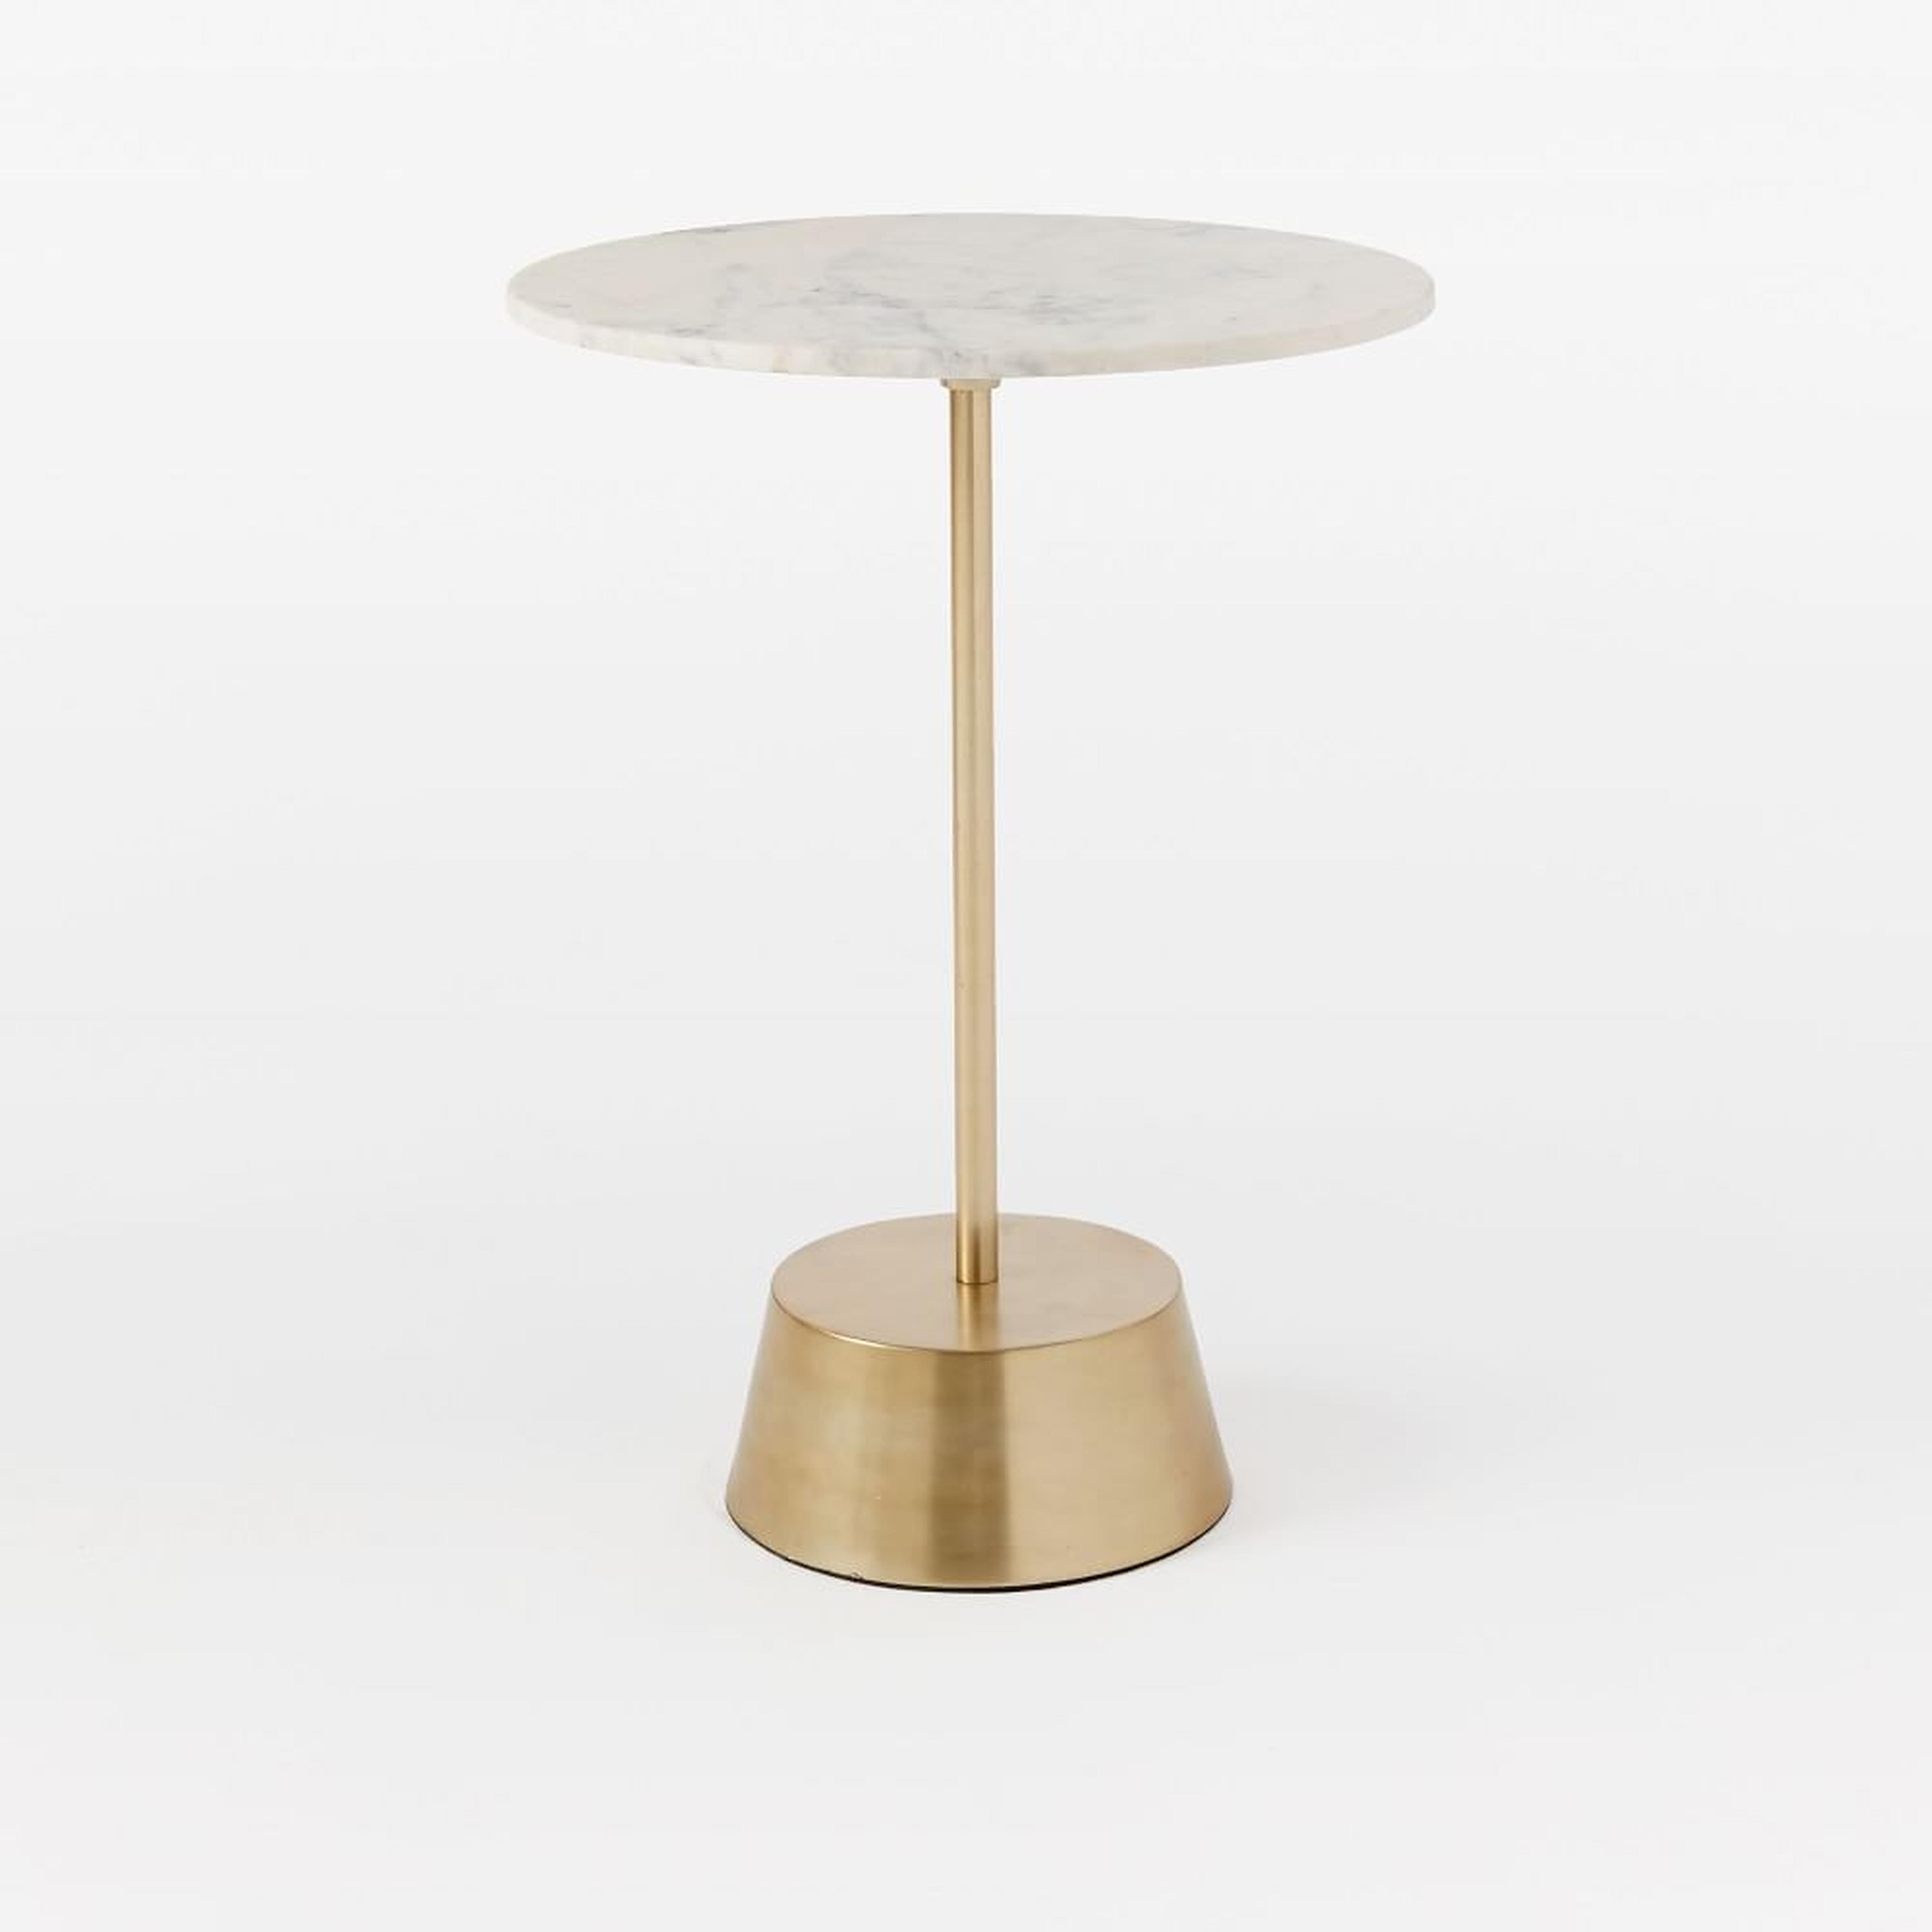 Maisie 16" Side Table, White Marble, Antique Brass - West Elm